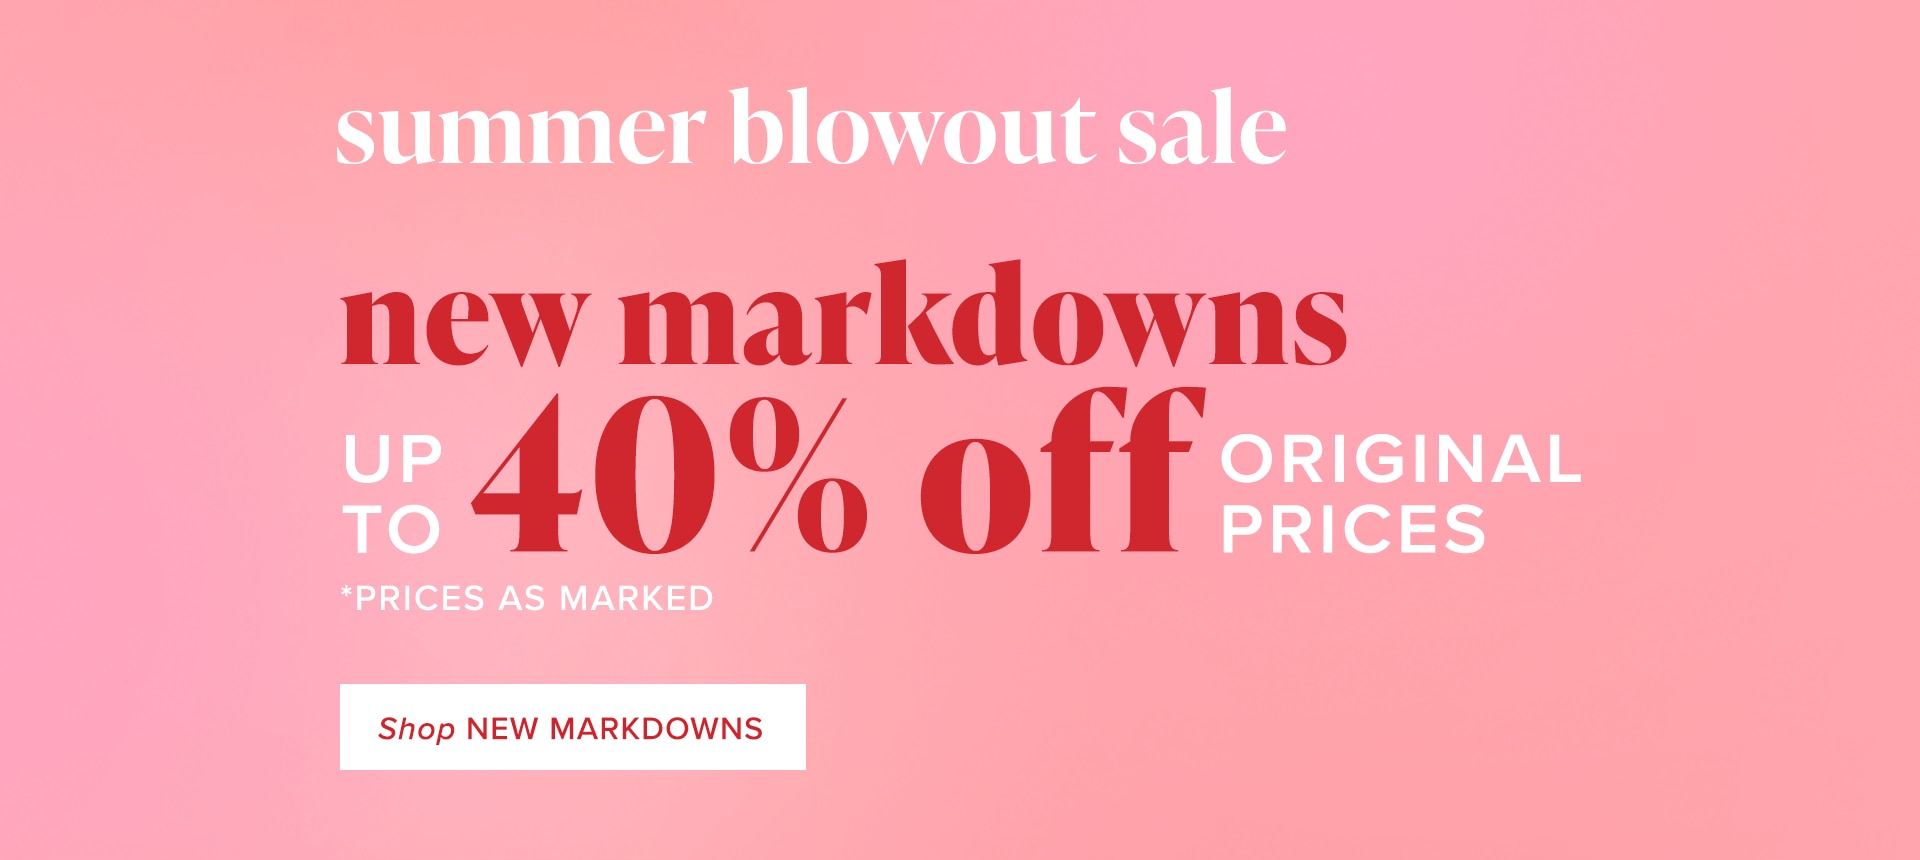 New Markdowns Up to 40% Off Original Prices